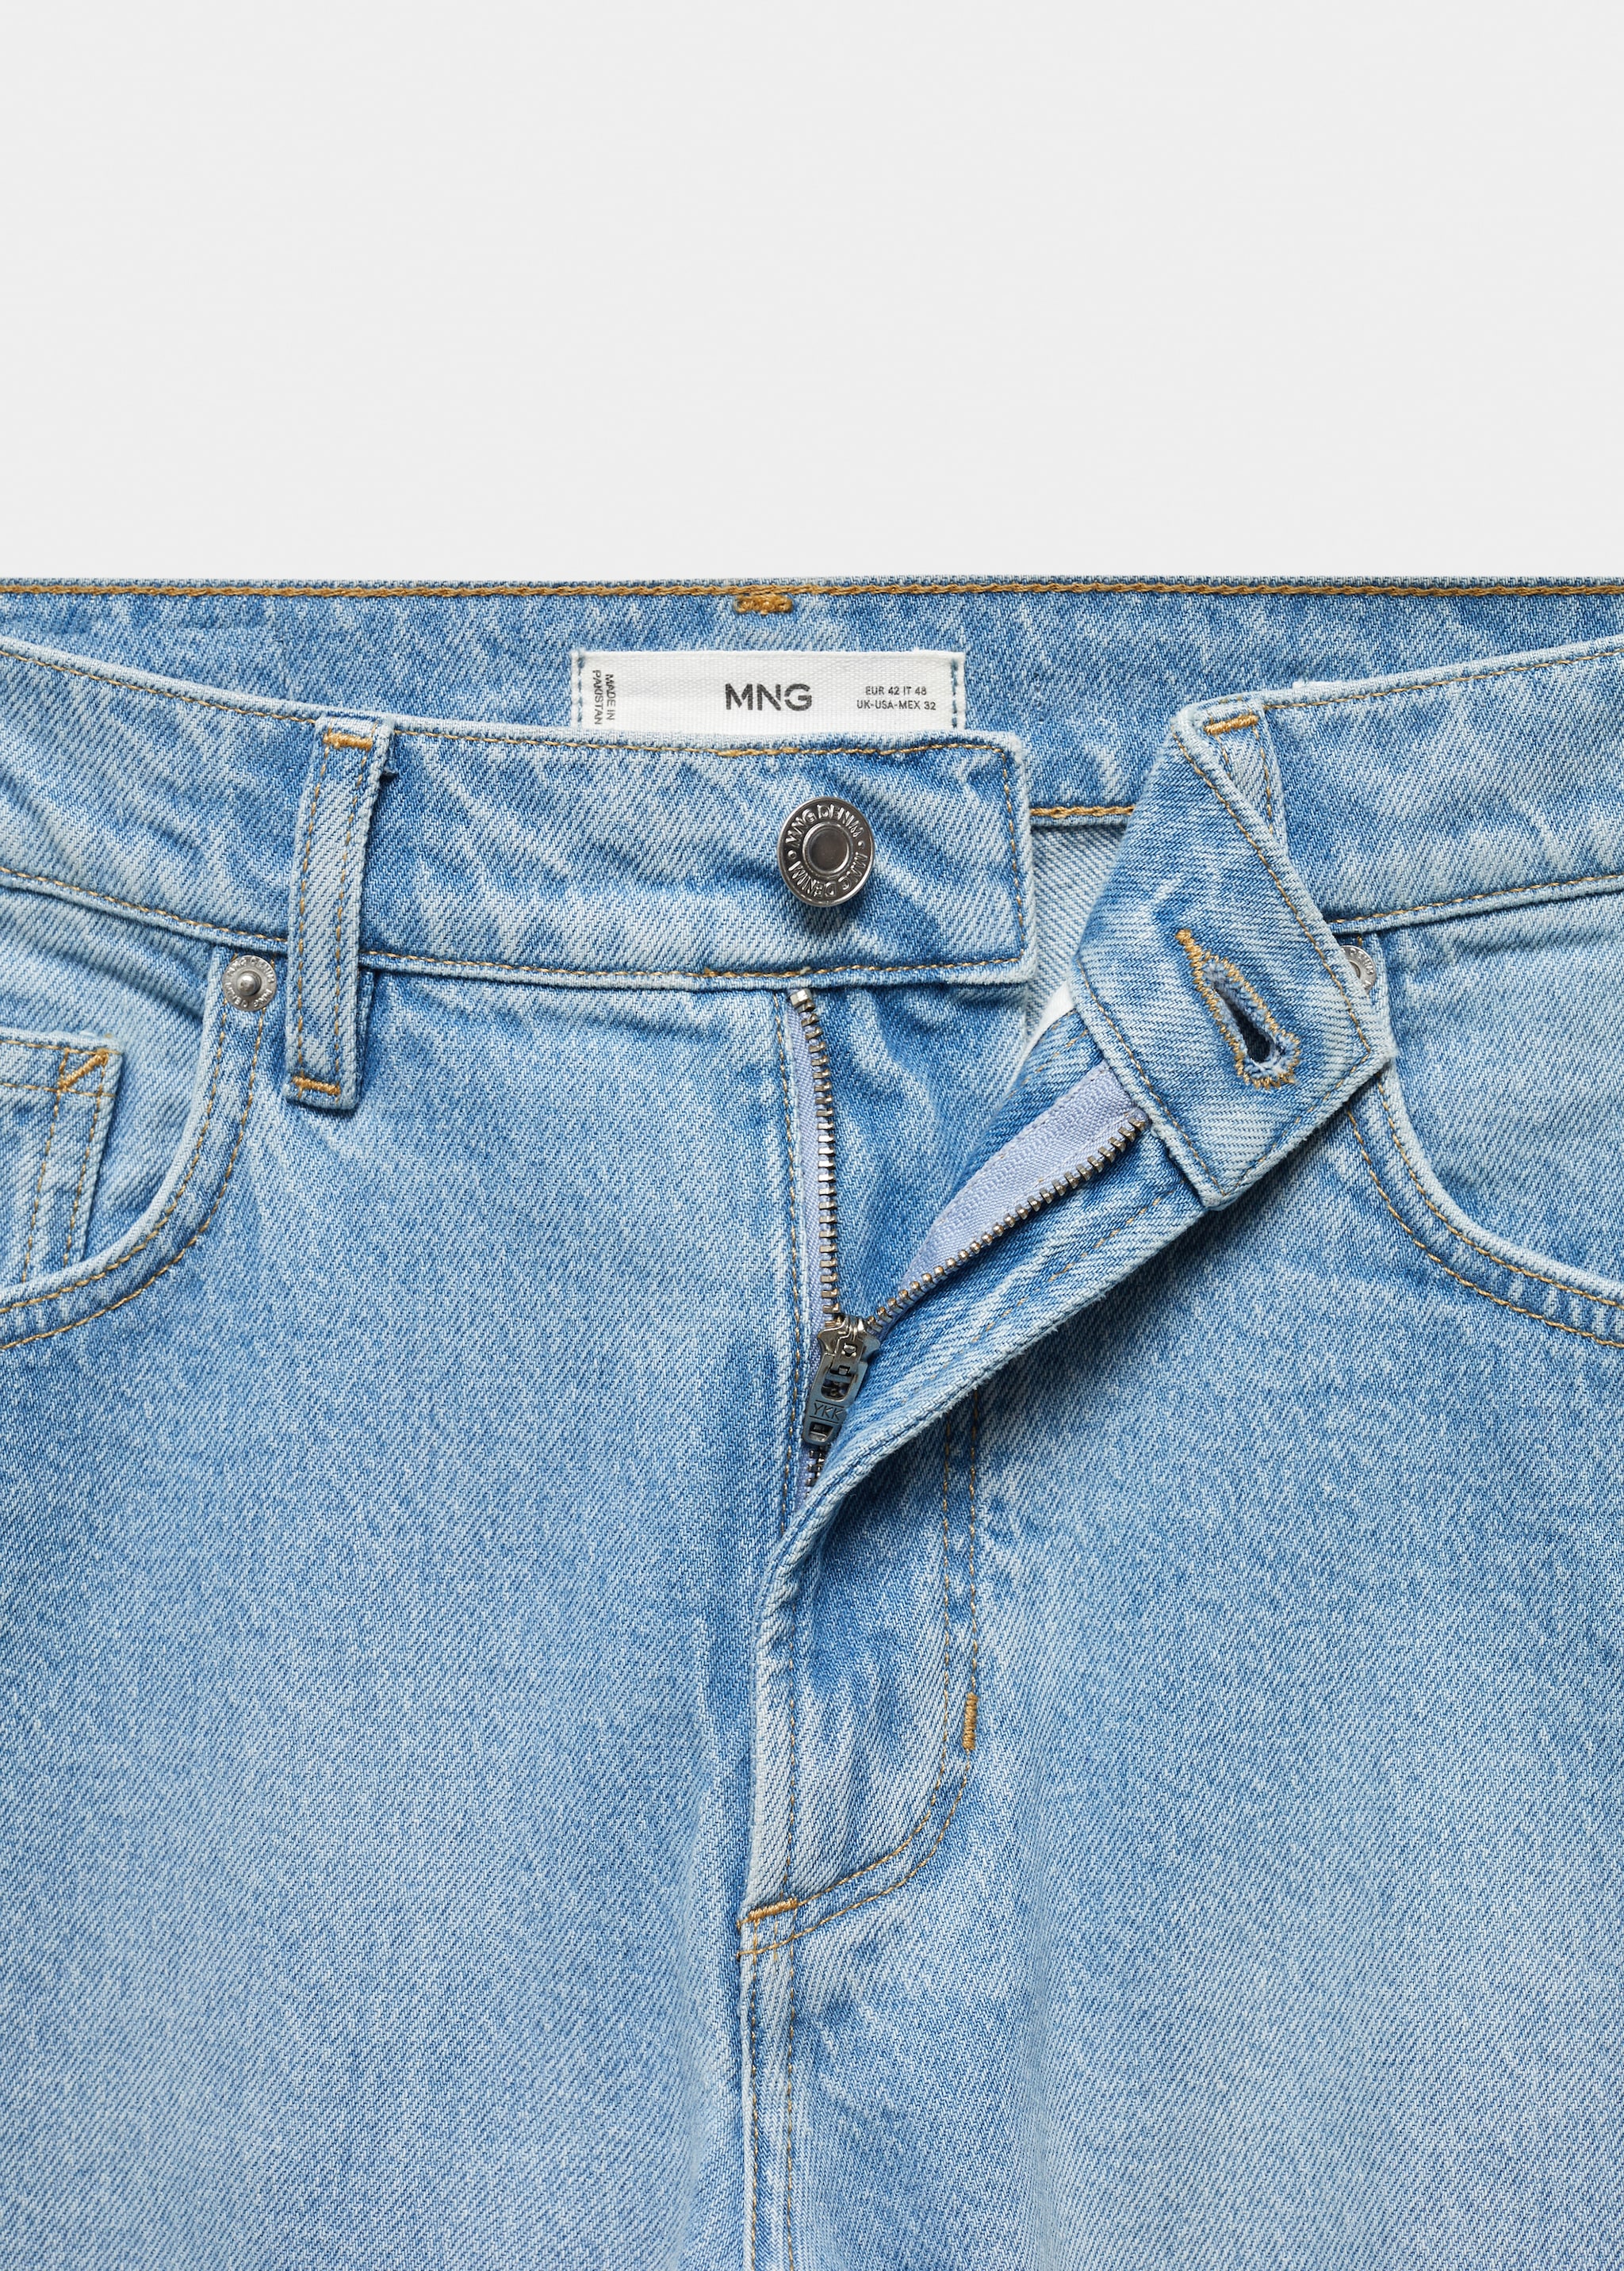 Ben tapered fit jeans - Details of the article 8